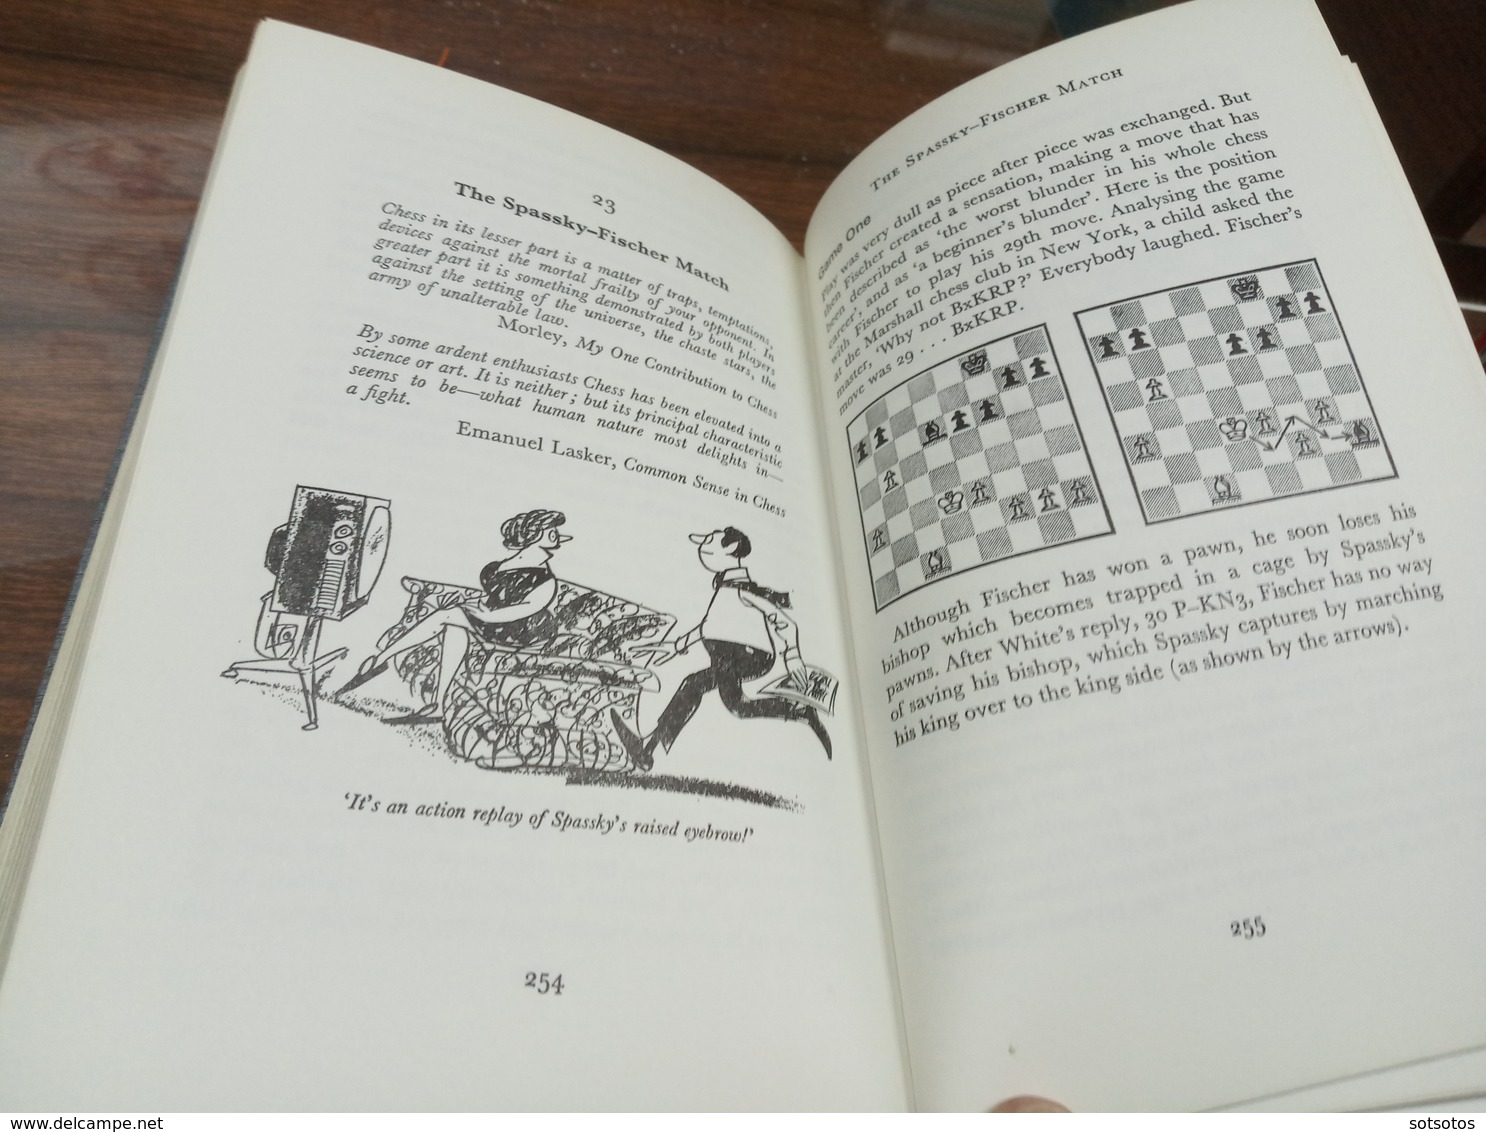 The Chess Scene, David Levy and Stewart Reuben, Faber and Faber, London. 1974 (20,50x13,5 cm) - in fine quality except f